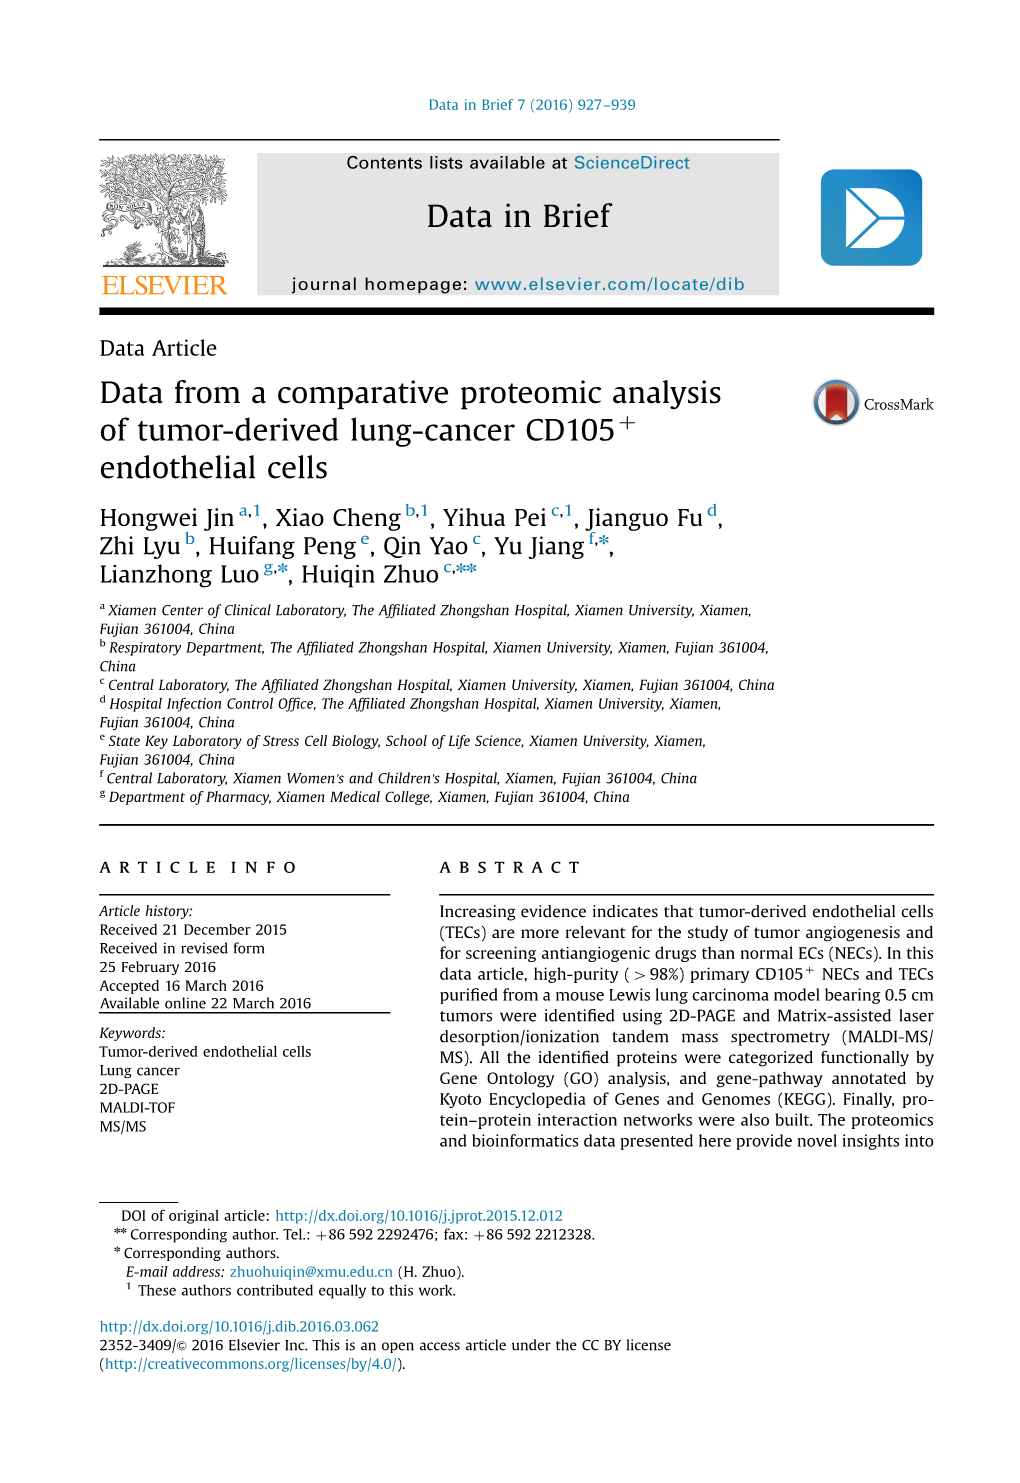 Data from a Comparative Proteomic Analysis of Tumor-Derived Lung-Cancer Cd105þ Endothelial Cells